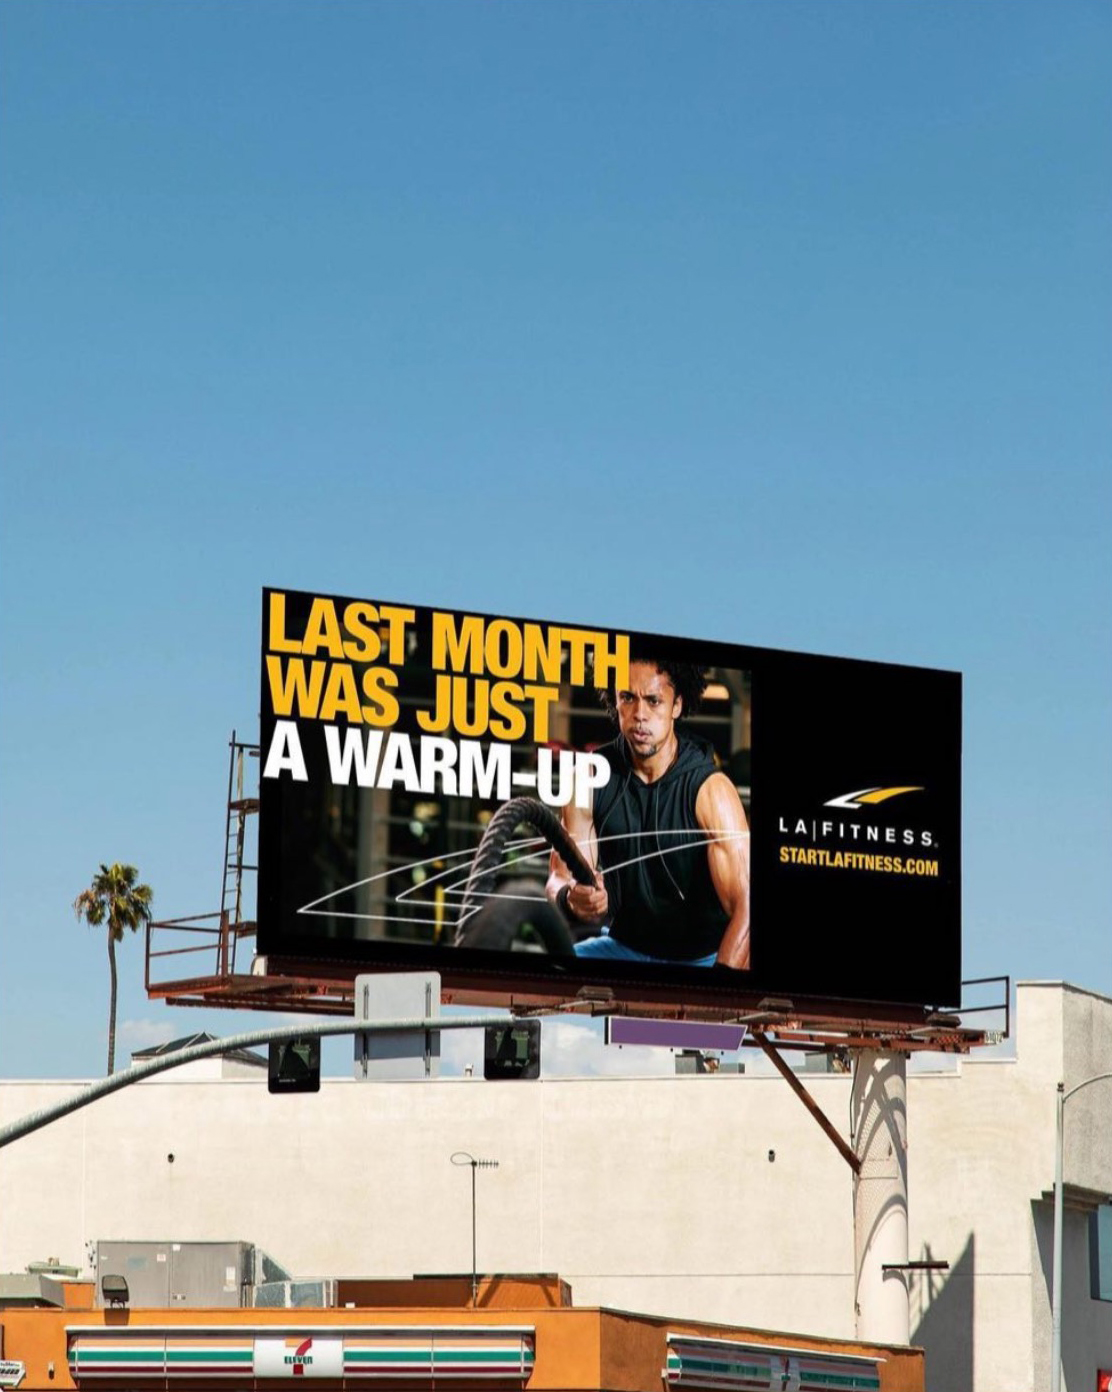 LA Fitness Billboard featuring an image by Caleb Kuhl of an african american man doing a ropes workout